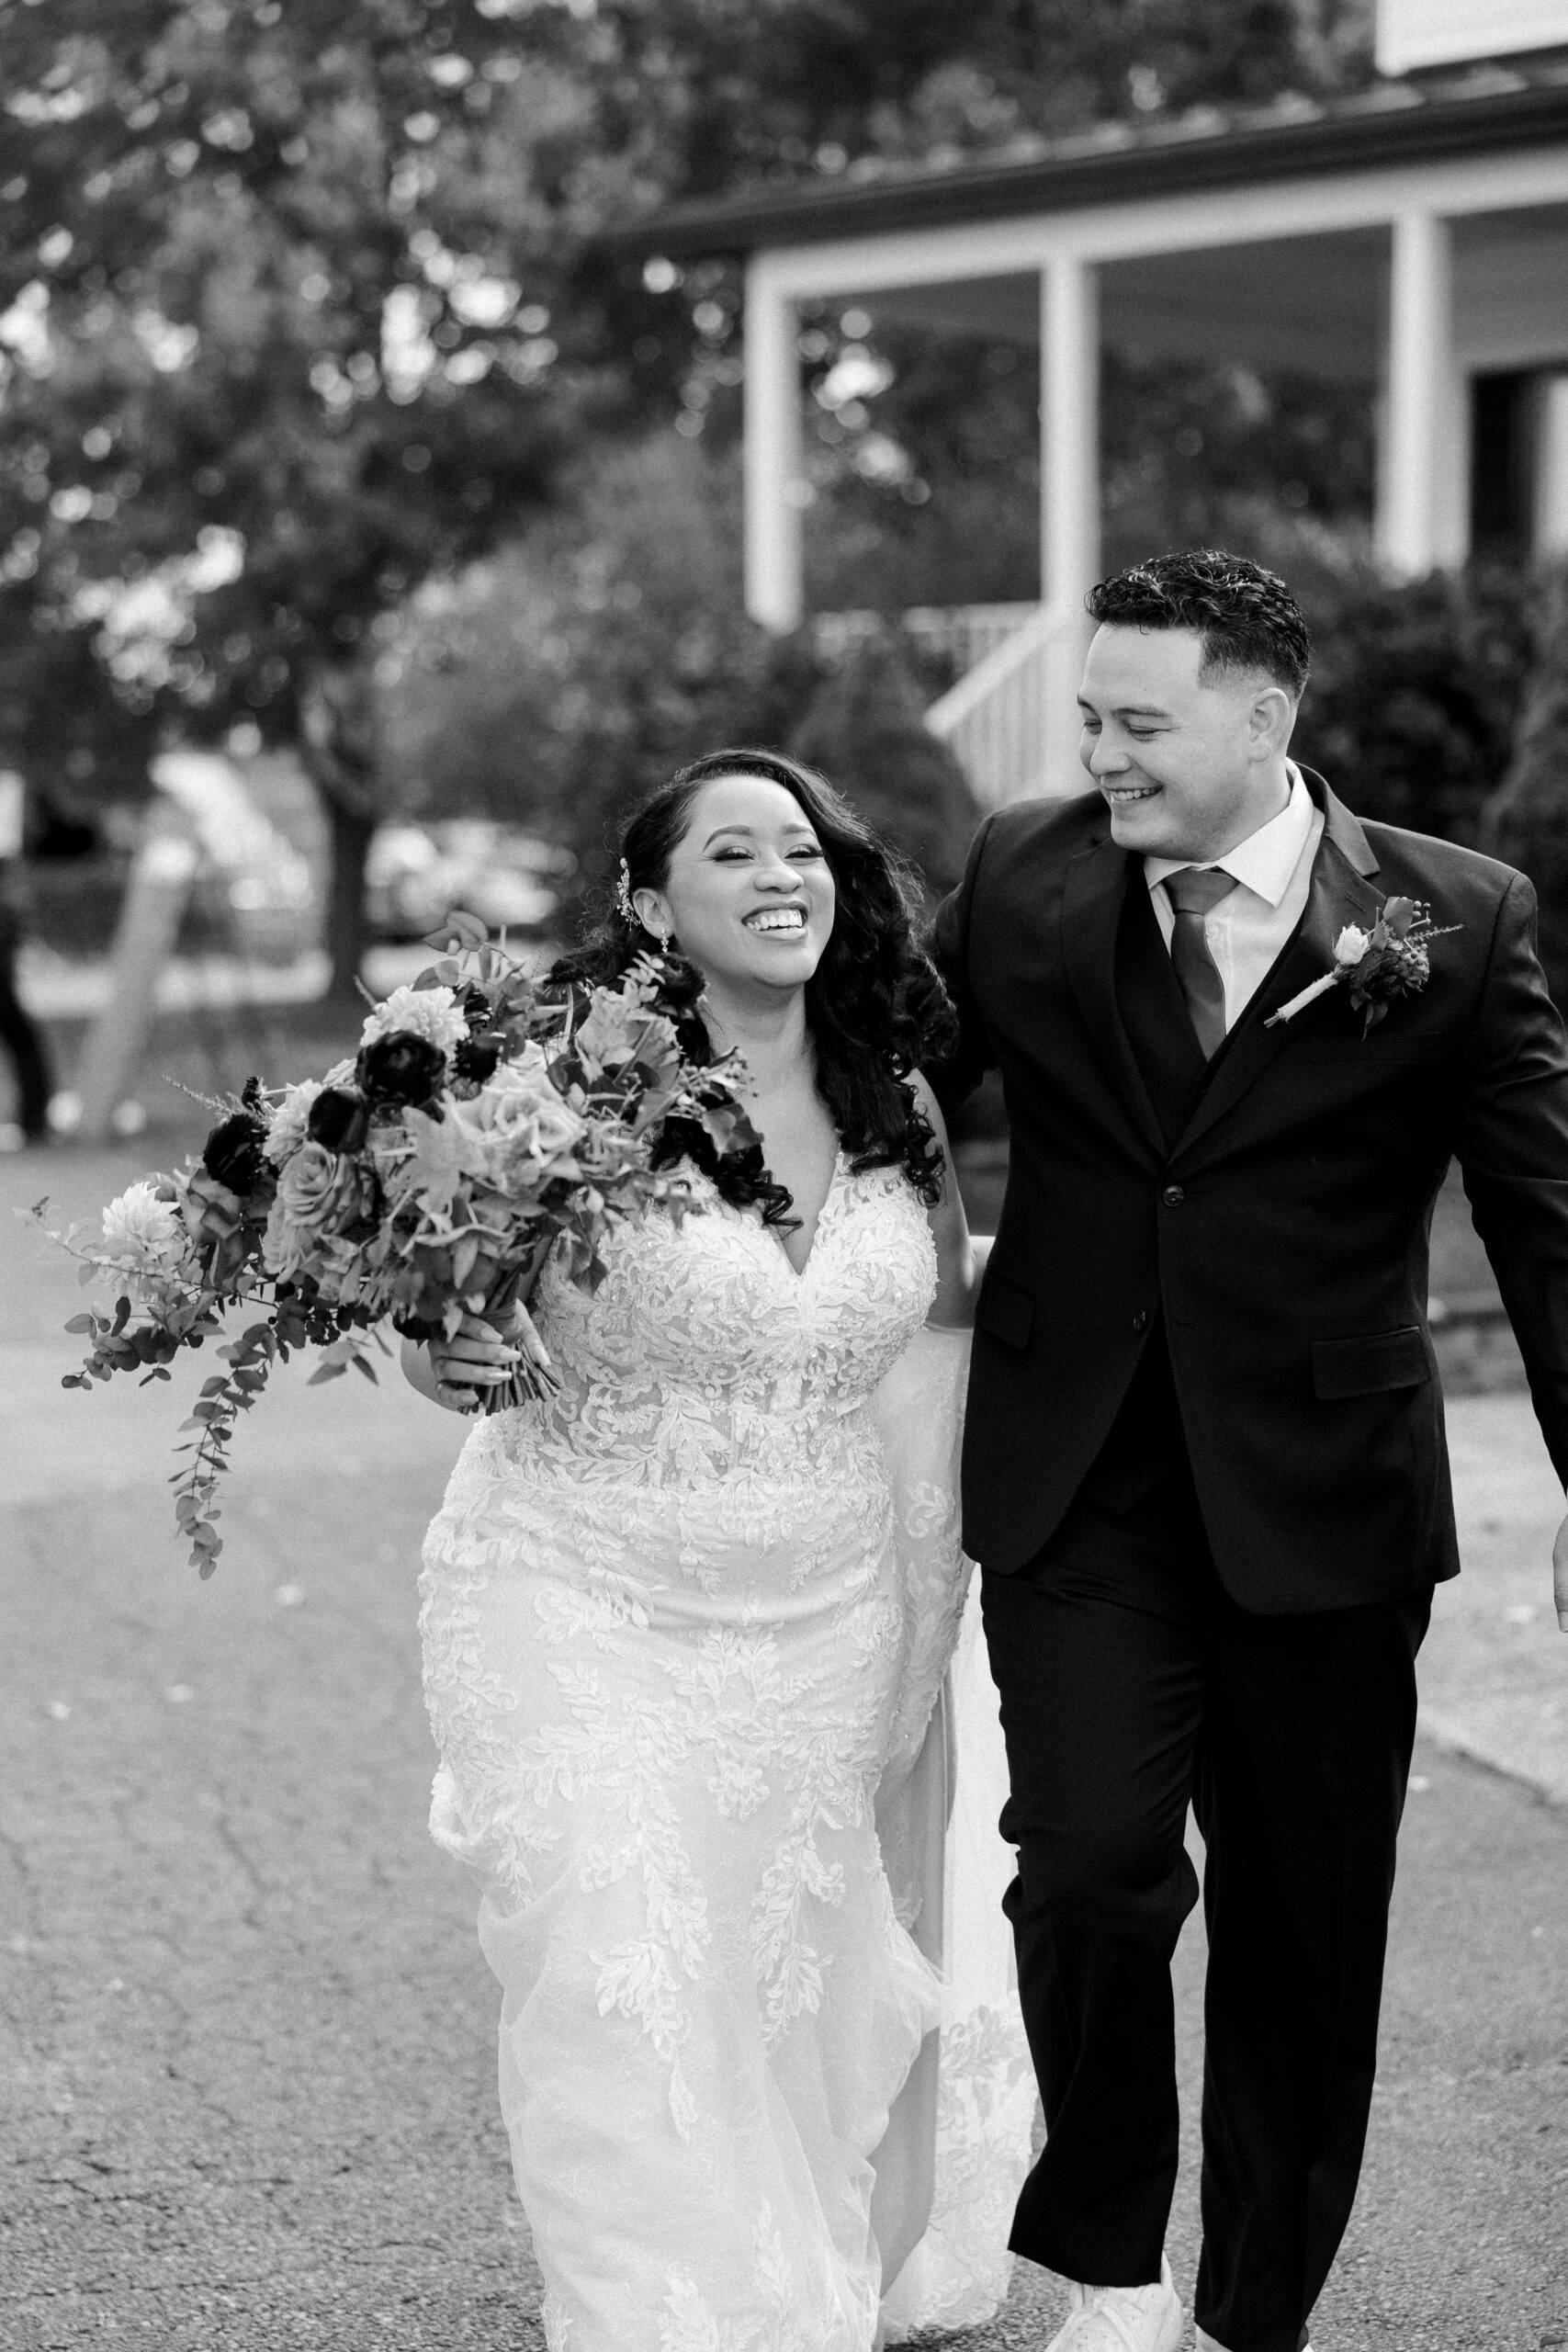 Black and white photo of bride and groom outside walking together and laughing as bride holds her bouquet